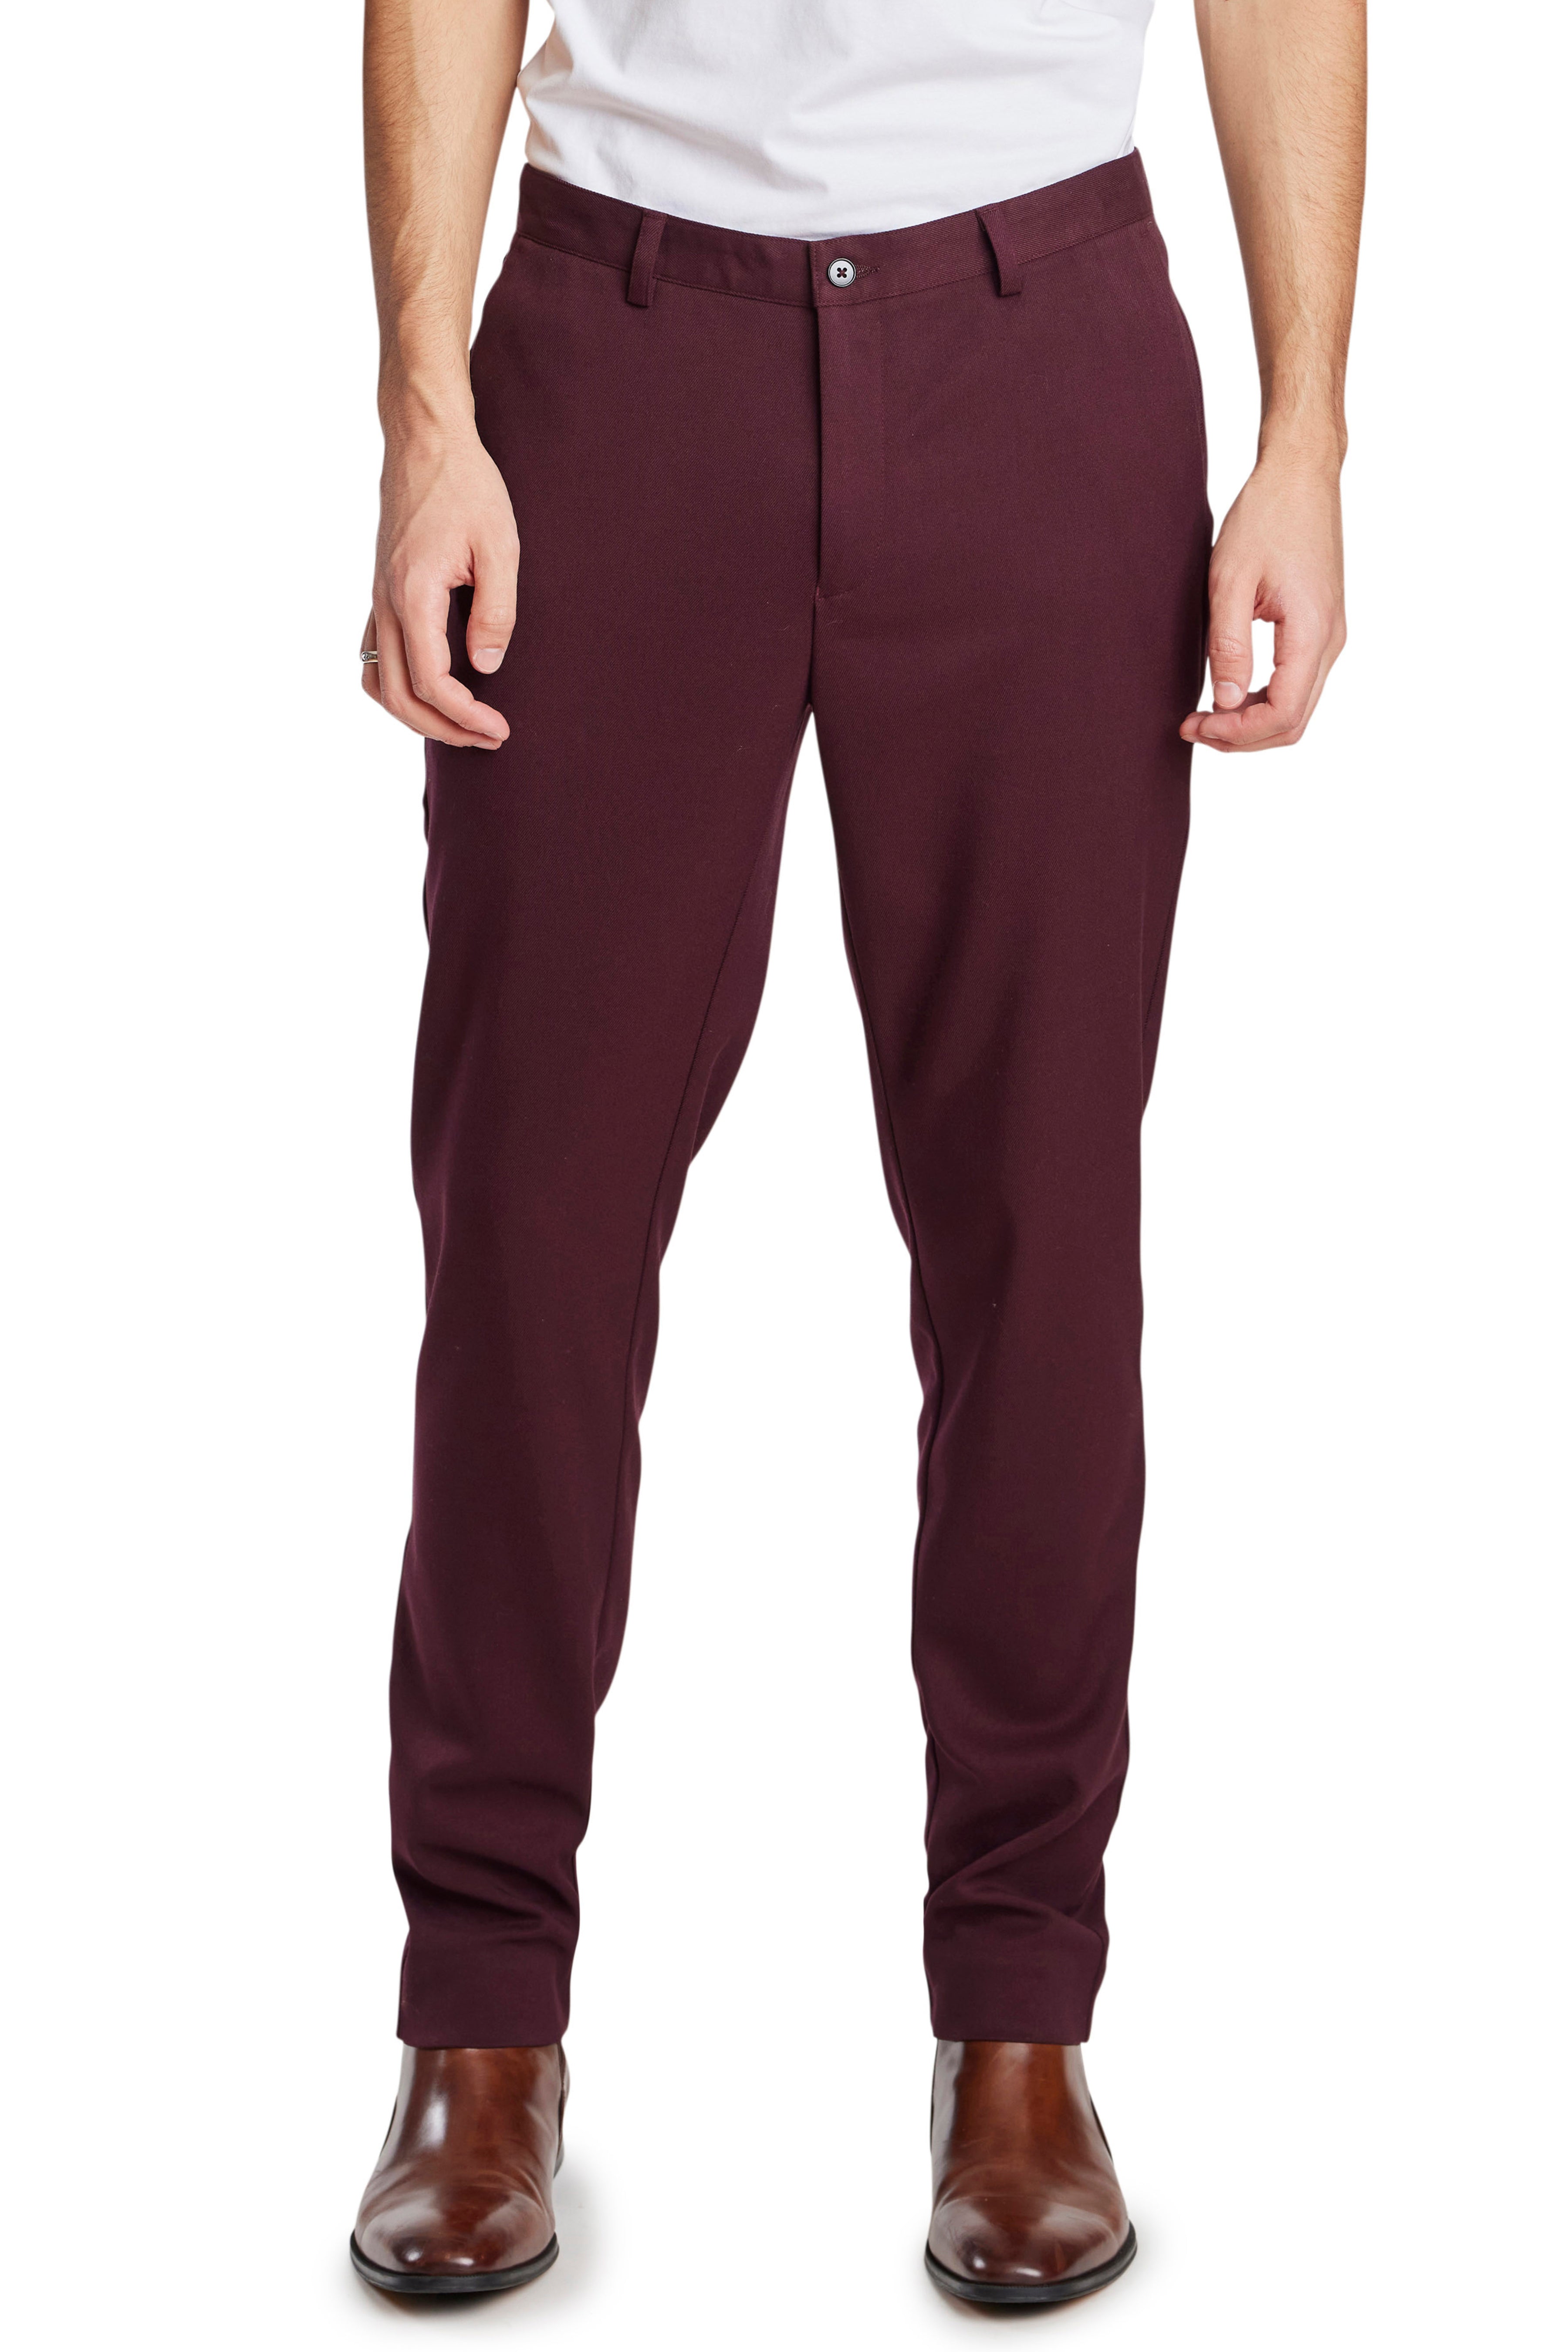 Buy Peter England Maroon Cotton Slim Fit Chinos for Mens Online @ Tata CLiQ